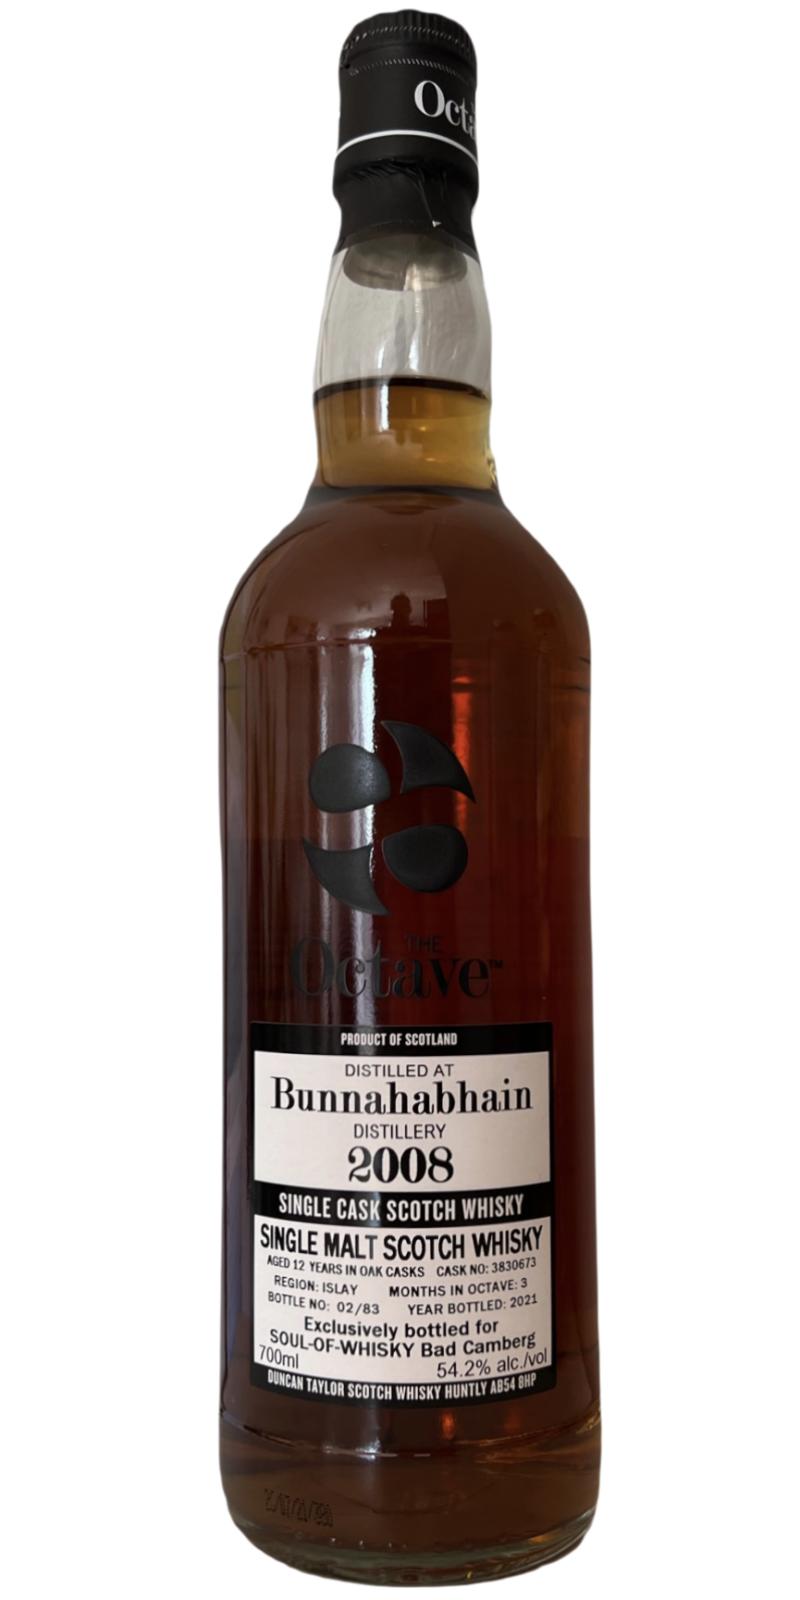 Bunnahabhain 2008 DT The Octave 12yo in Oak Casks 3 Month in Octave Soul of Whisky 54.2% 700ml